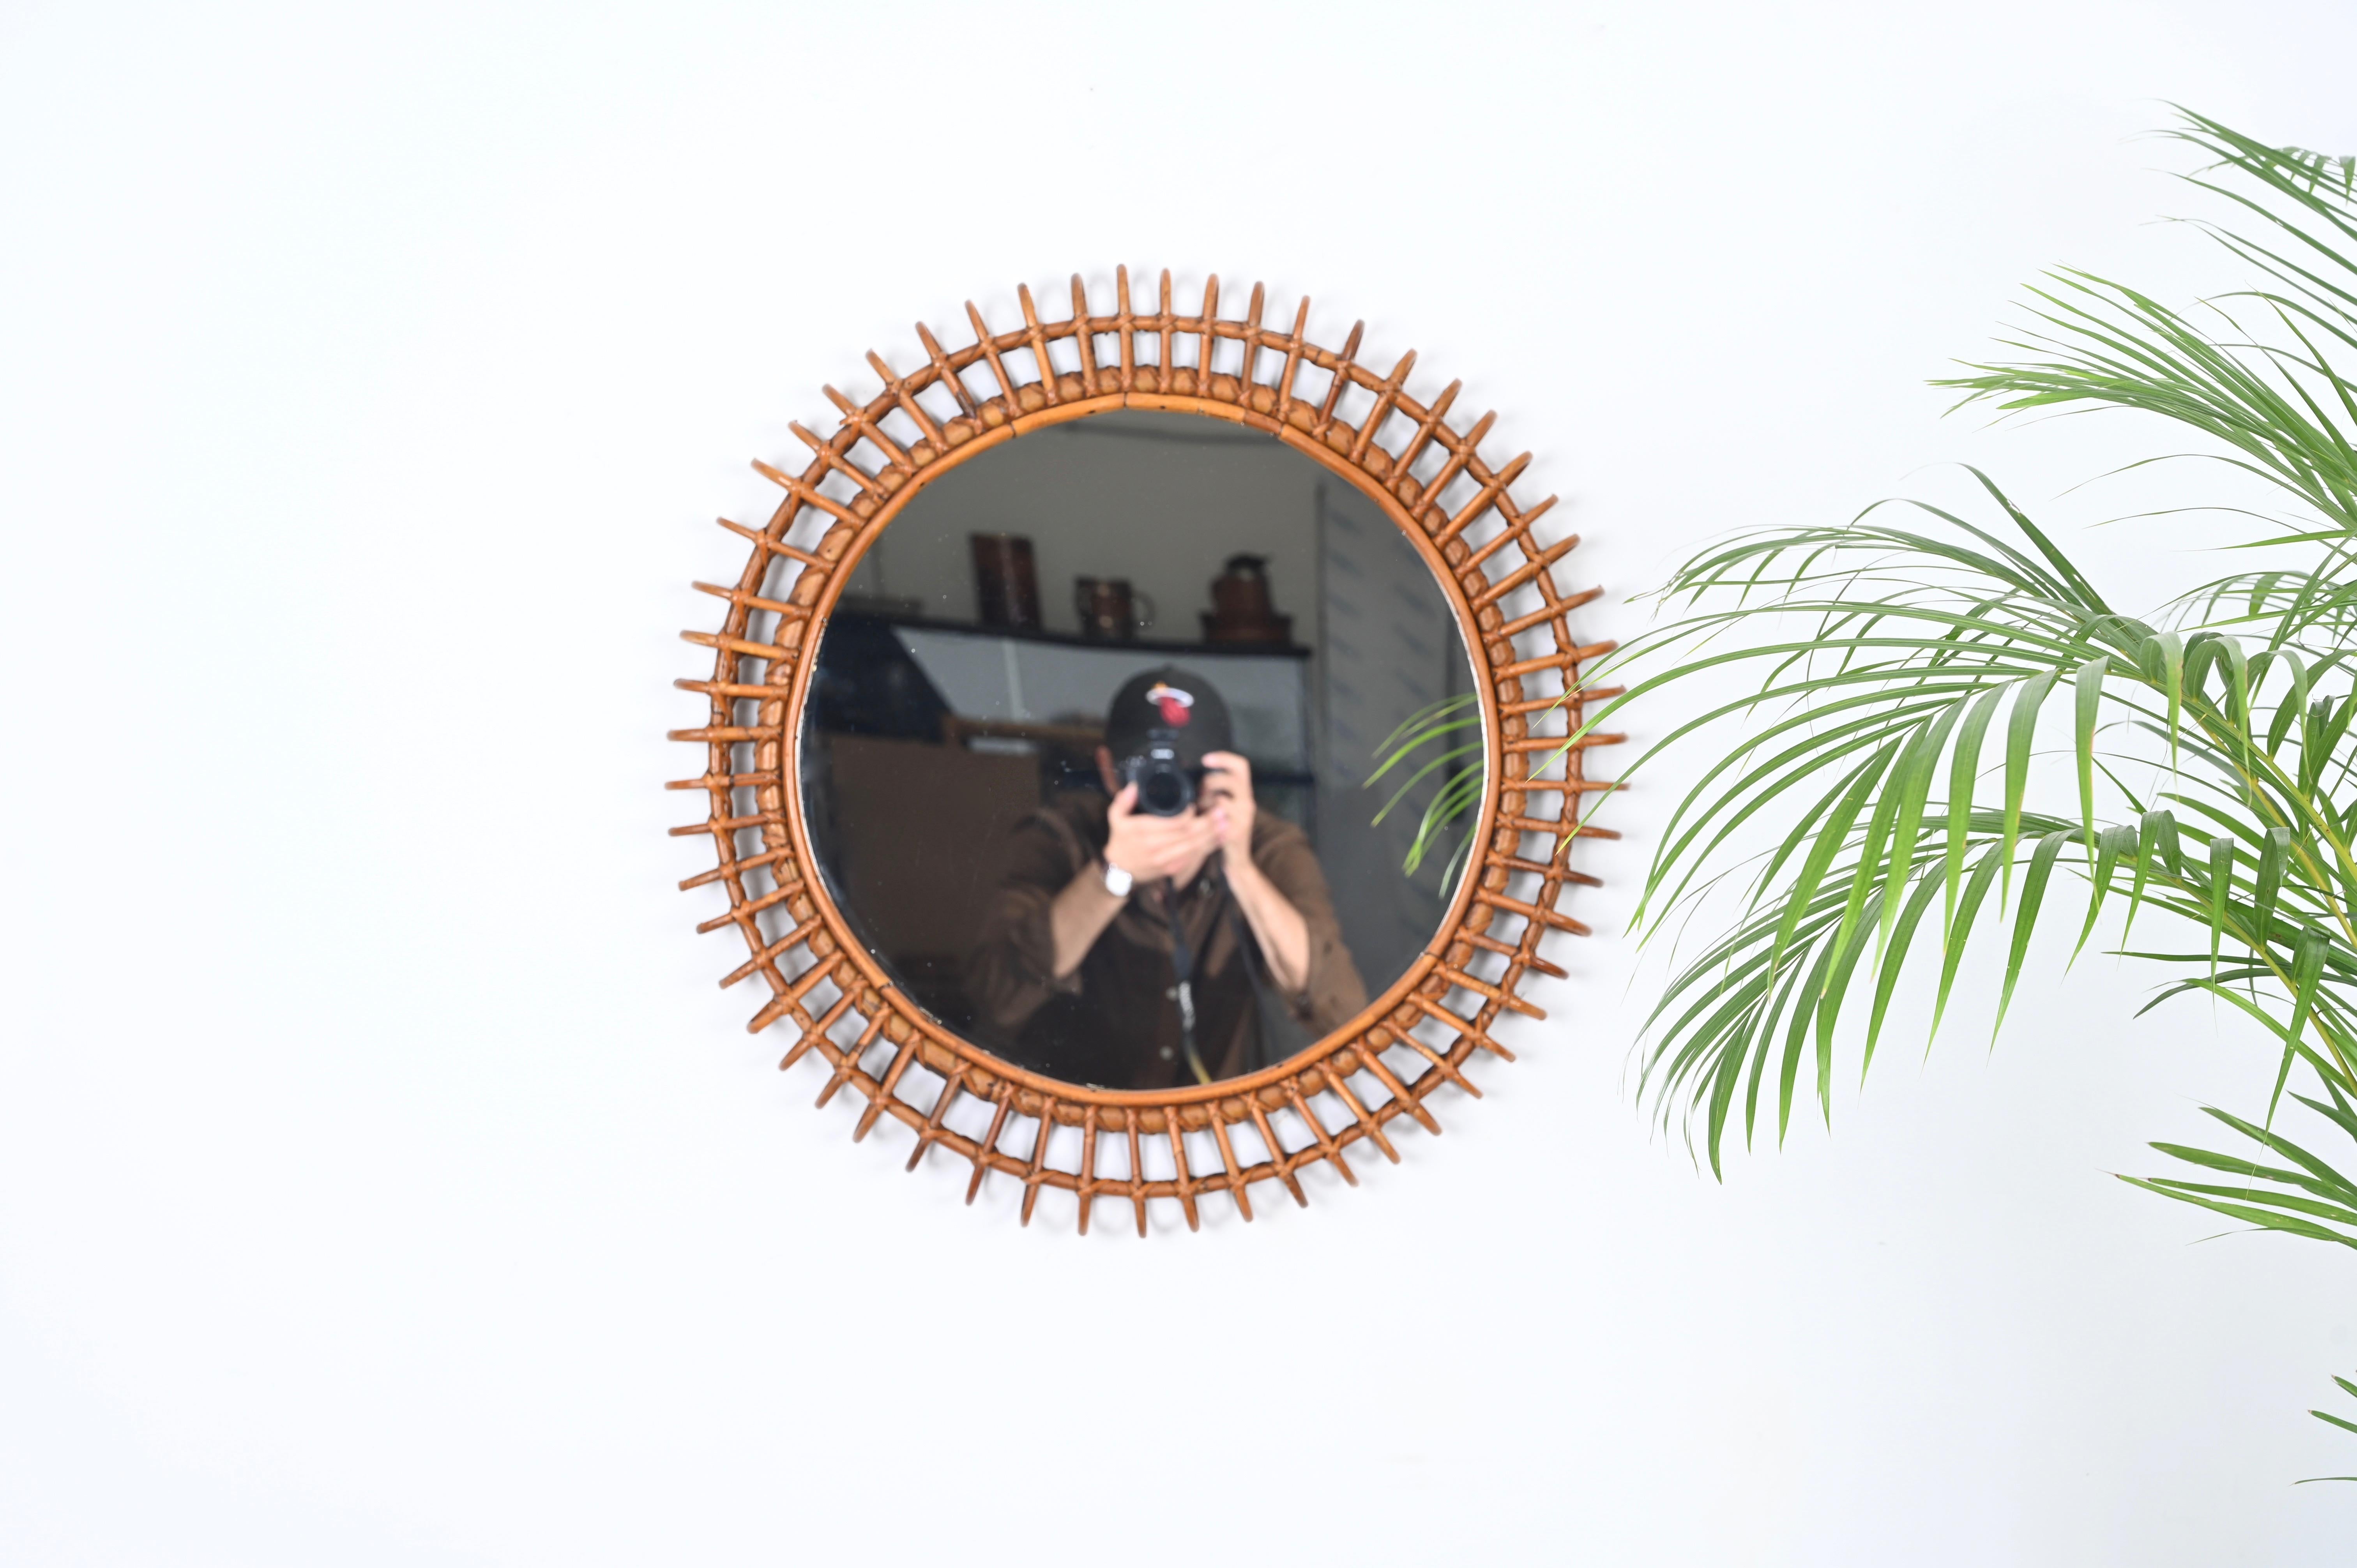 Fantastic Cote d'Azur mid-century round mirror in bamboo, rattan and wicker. This astonishing piece was produced in Italy during the 1960s, and it is attributed to the mastery of Franco Albini.

This stunning mirror features a triple frame in curved